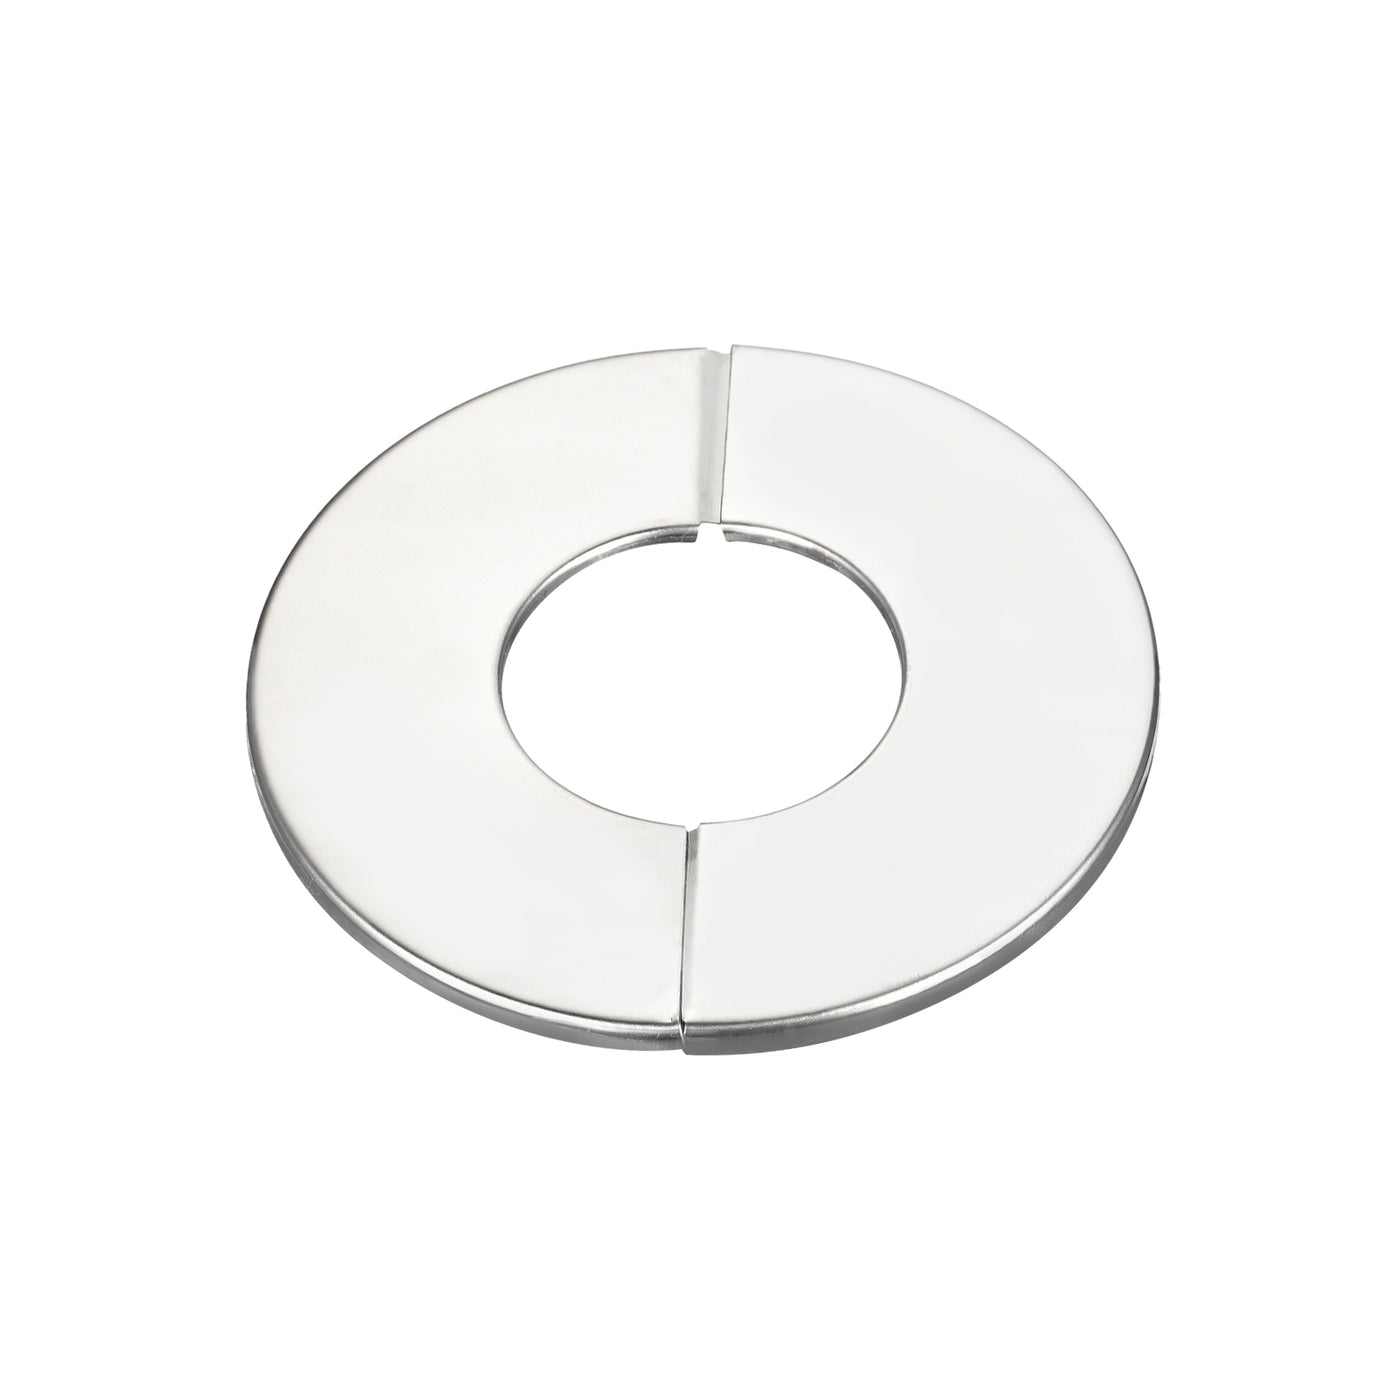 Uxcell Uxcell Wall Split Flange, 201 Stainless Steel Round Escutcheon Plate for 101mm Diameter Pipe